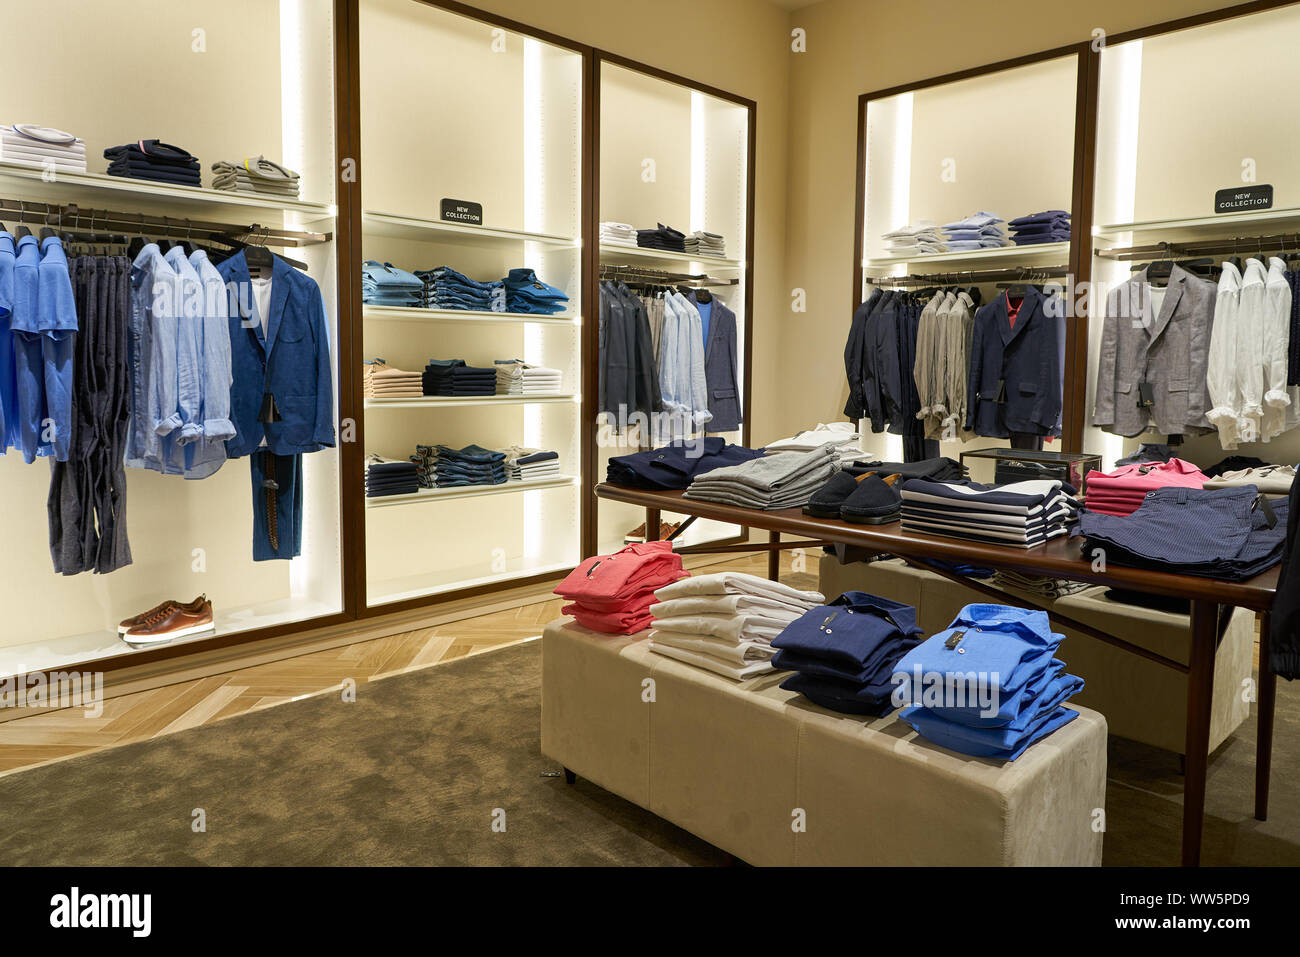 Massimo dutti boutique hi-res stock photography and images - Alamy